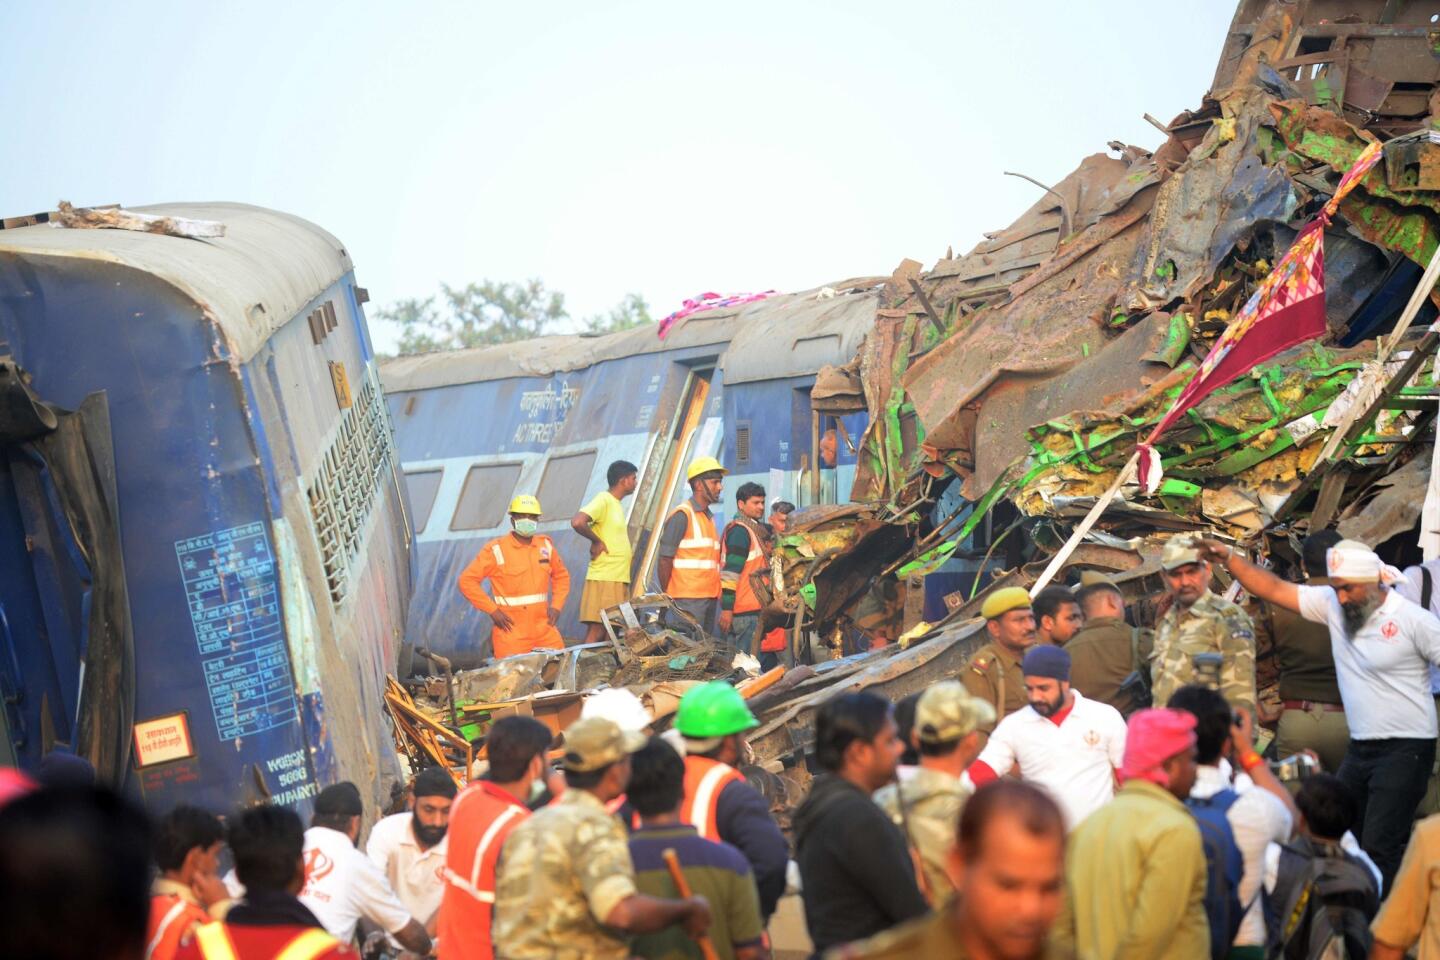 Indian rescue workers search for survivors in the wreckage of a train that derailed near Pukhrayan in Kanpur district on Nov. 20, 2016.